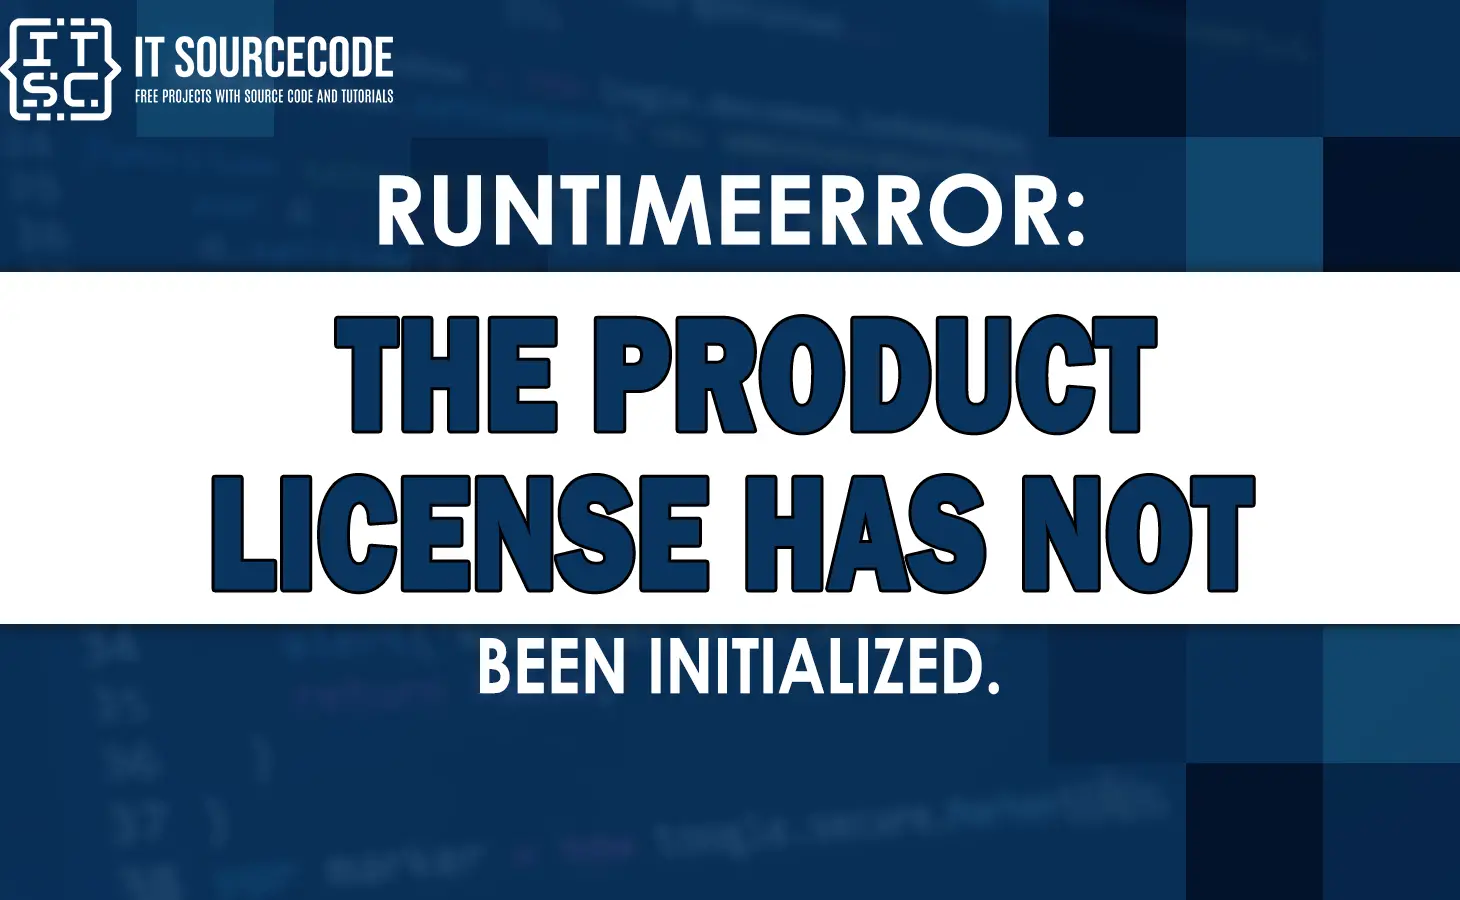 Runtimeerror the product license has not been initialized.